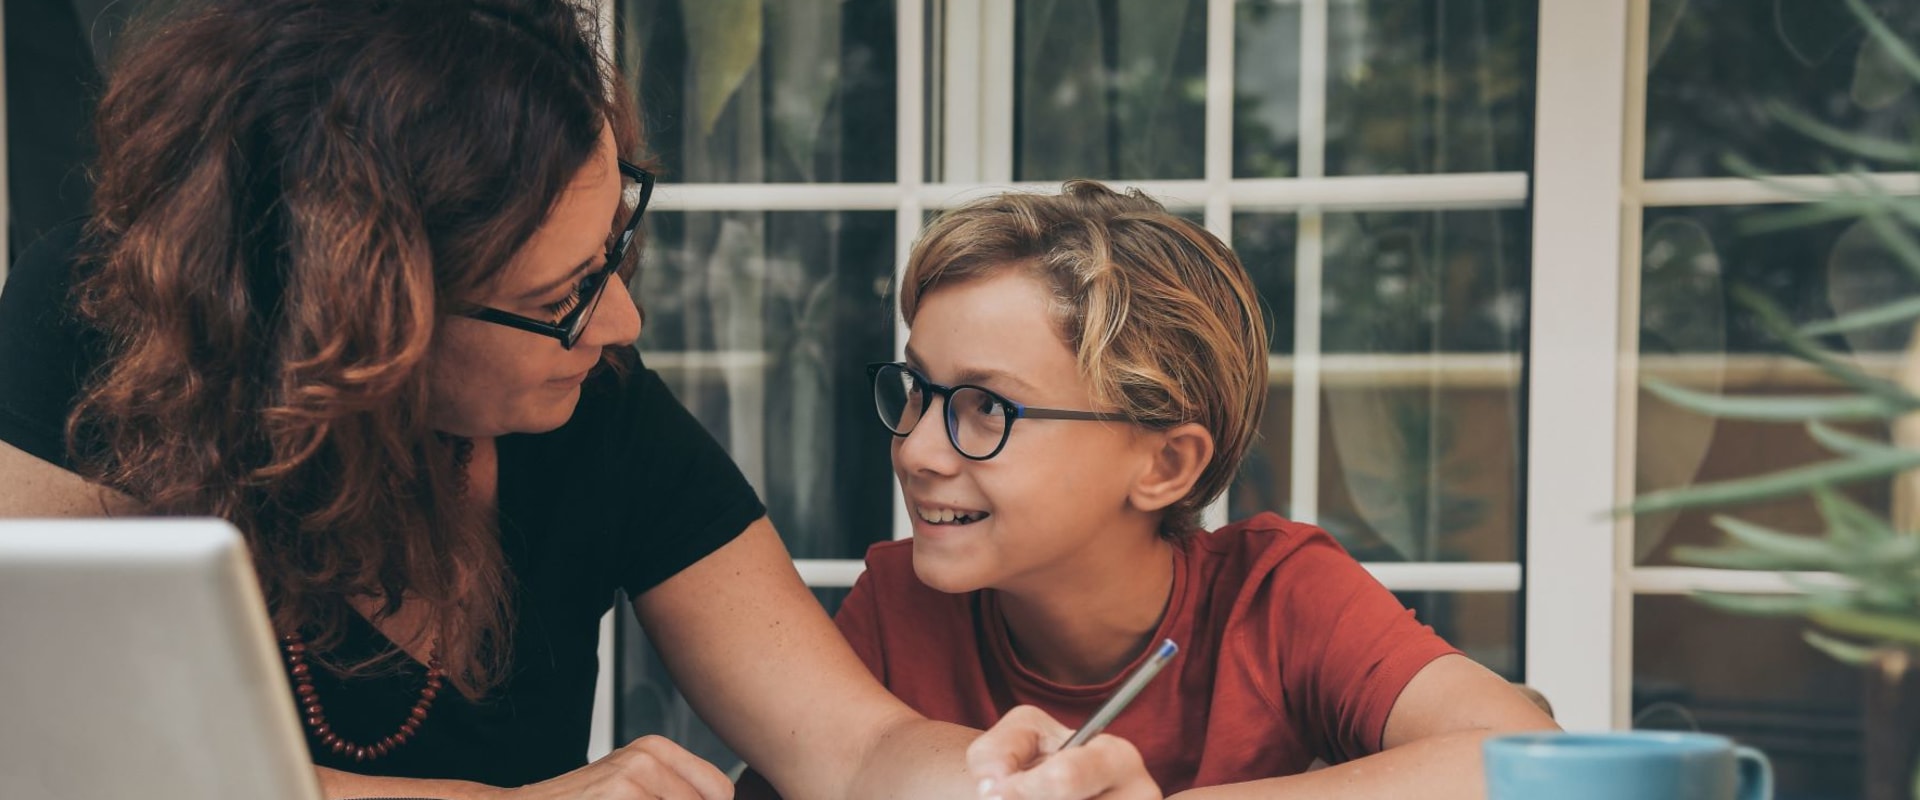 10 Reasons Why Home Schooling is Better